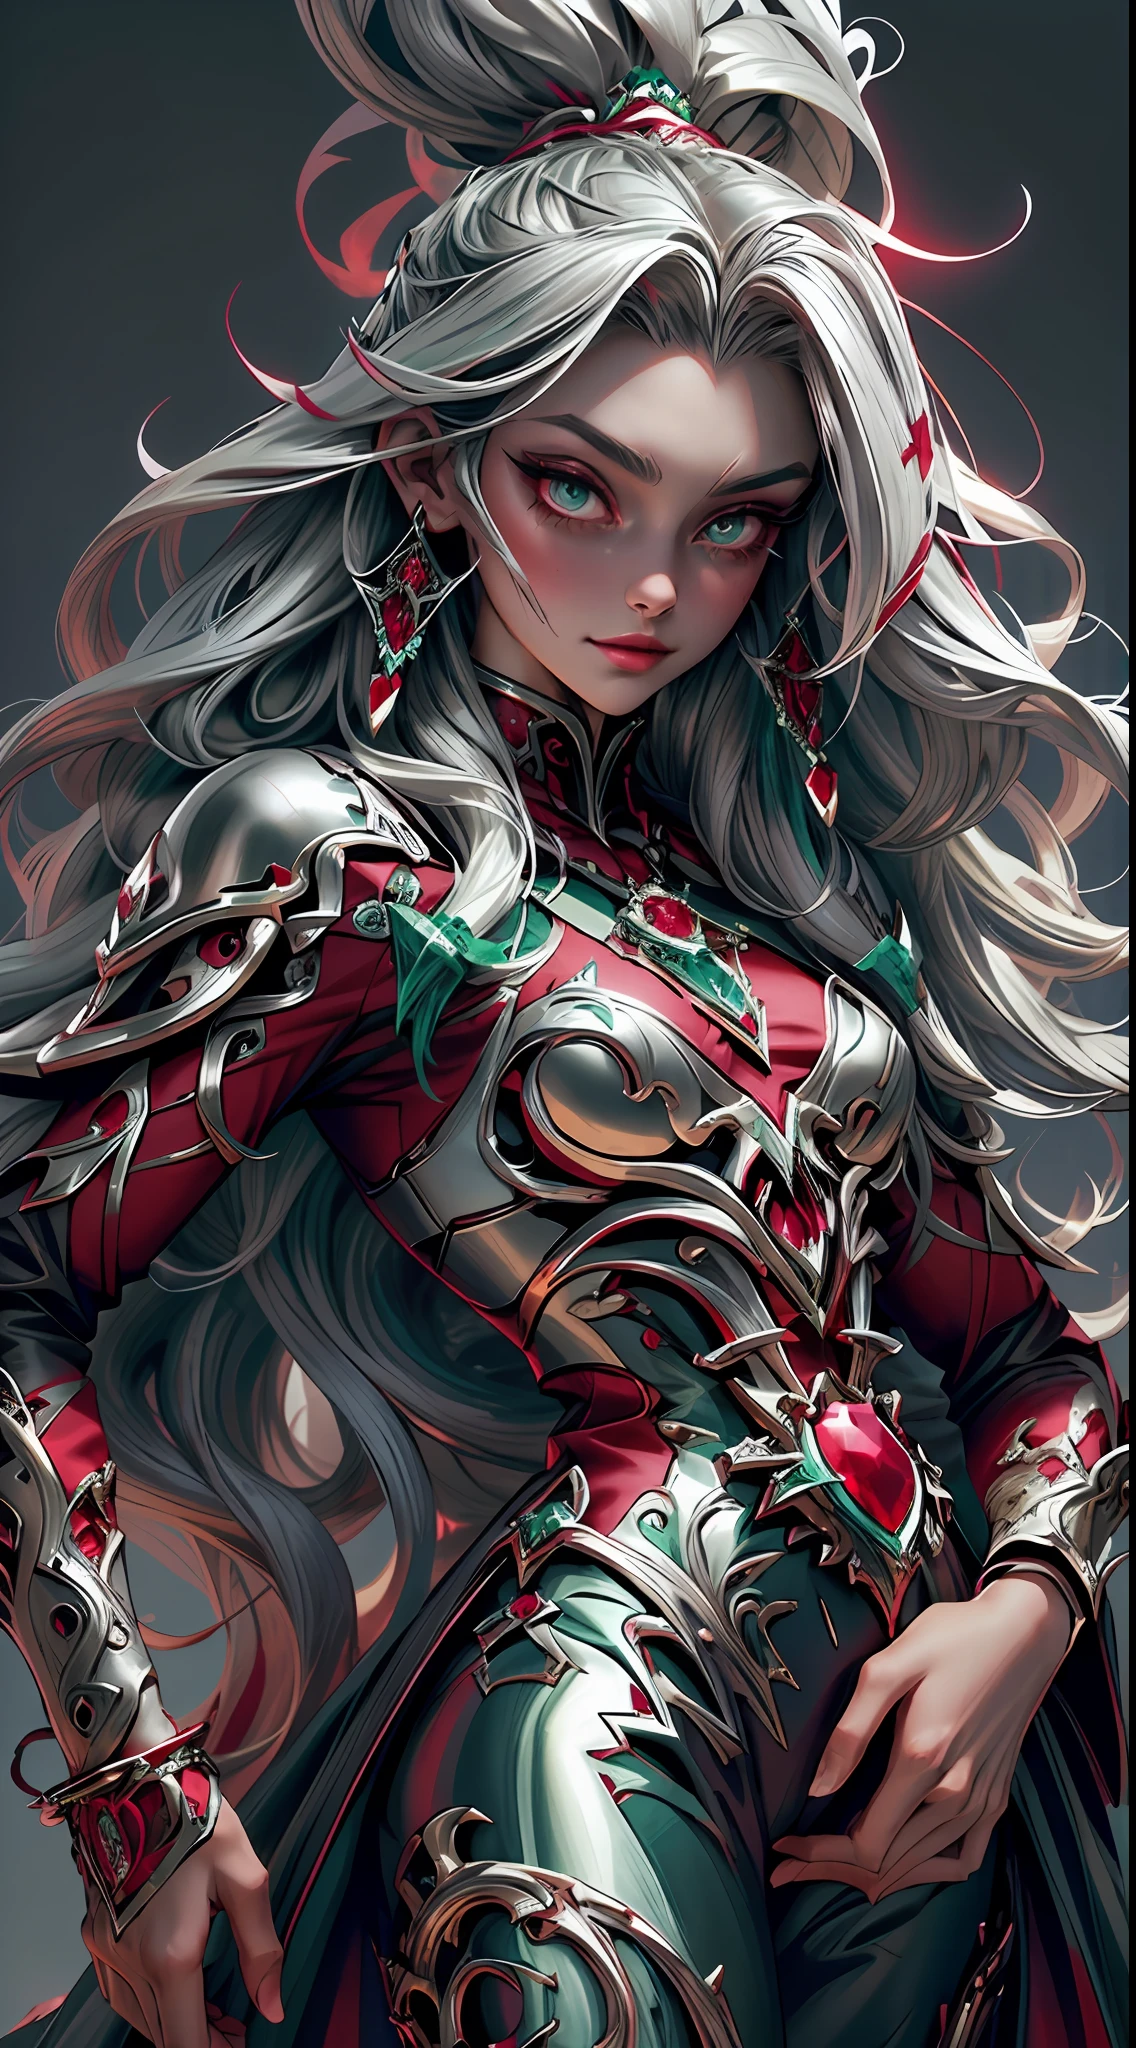 (masterpiece:1.4, best quality), (((emerald color))), ruby color, silver color, (intricate details), unity 8k wallpaper, ultra detailed, (a fantasy vampire girl),illustration, full body, ethereal figure, otherworldly subjects, (style of Alex Konstad:1.3), vivid hues, vamptech, blood, vampiric, (alluring dress), (medival:1.1), (bold use of colors:1.1), wavy hair, very extra long hair, (ruby), (((emerald)))), (silver), intricate patterns, fusion of traditional and digital techniques, (castle:1.2),